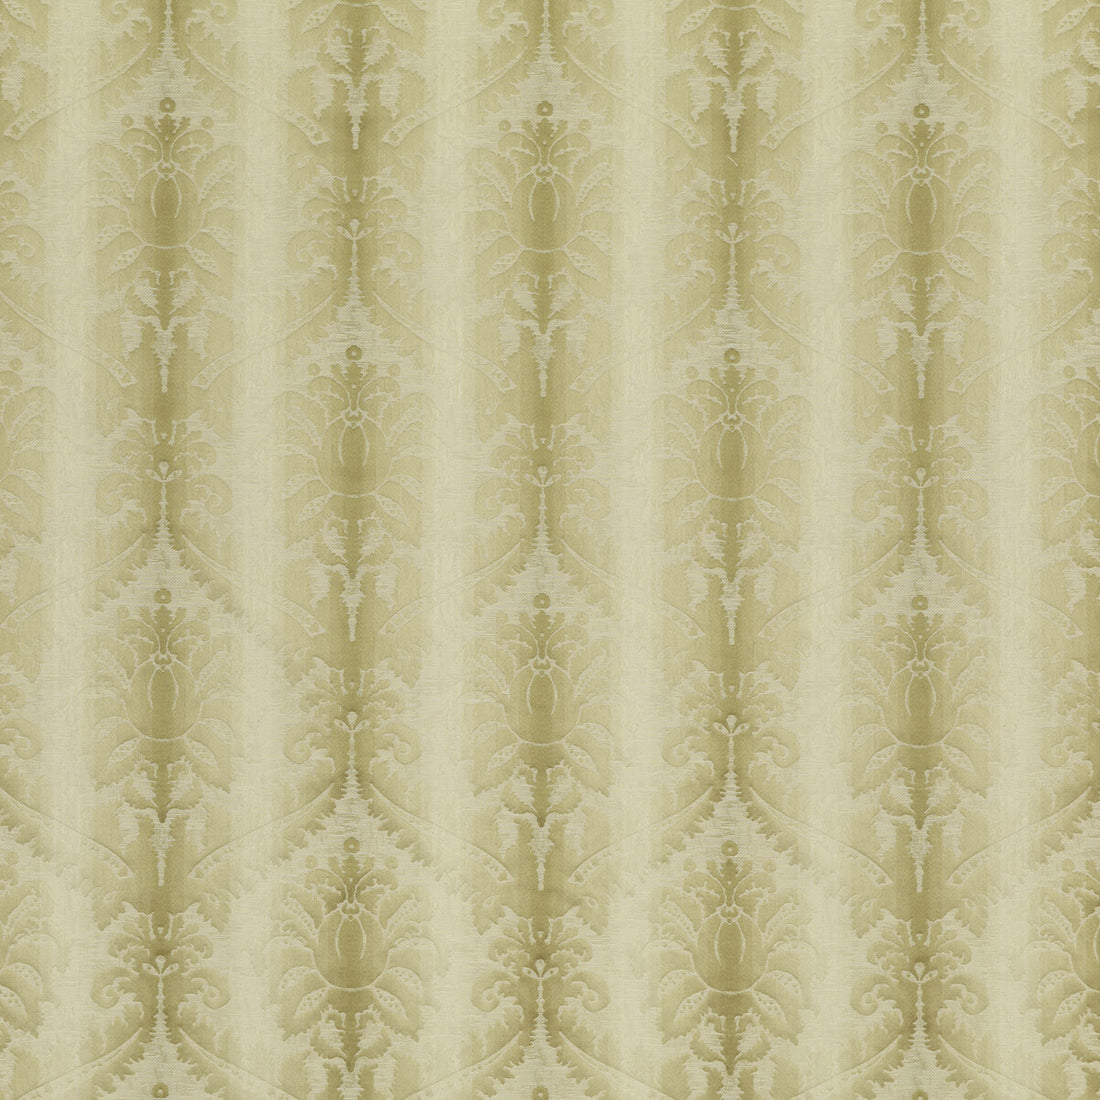 Poivre Damask fabric in sand color - pattern 8018106.16.0 - by Brunschwig &amp; Fils in the Cevennes collection